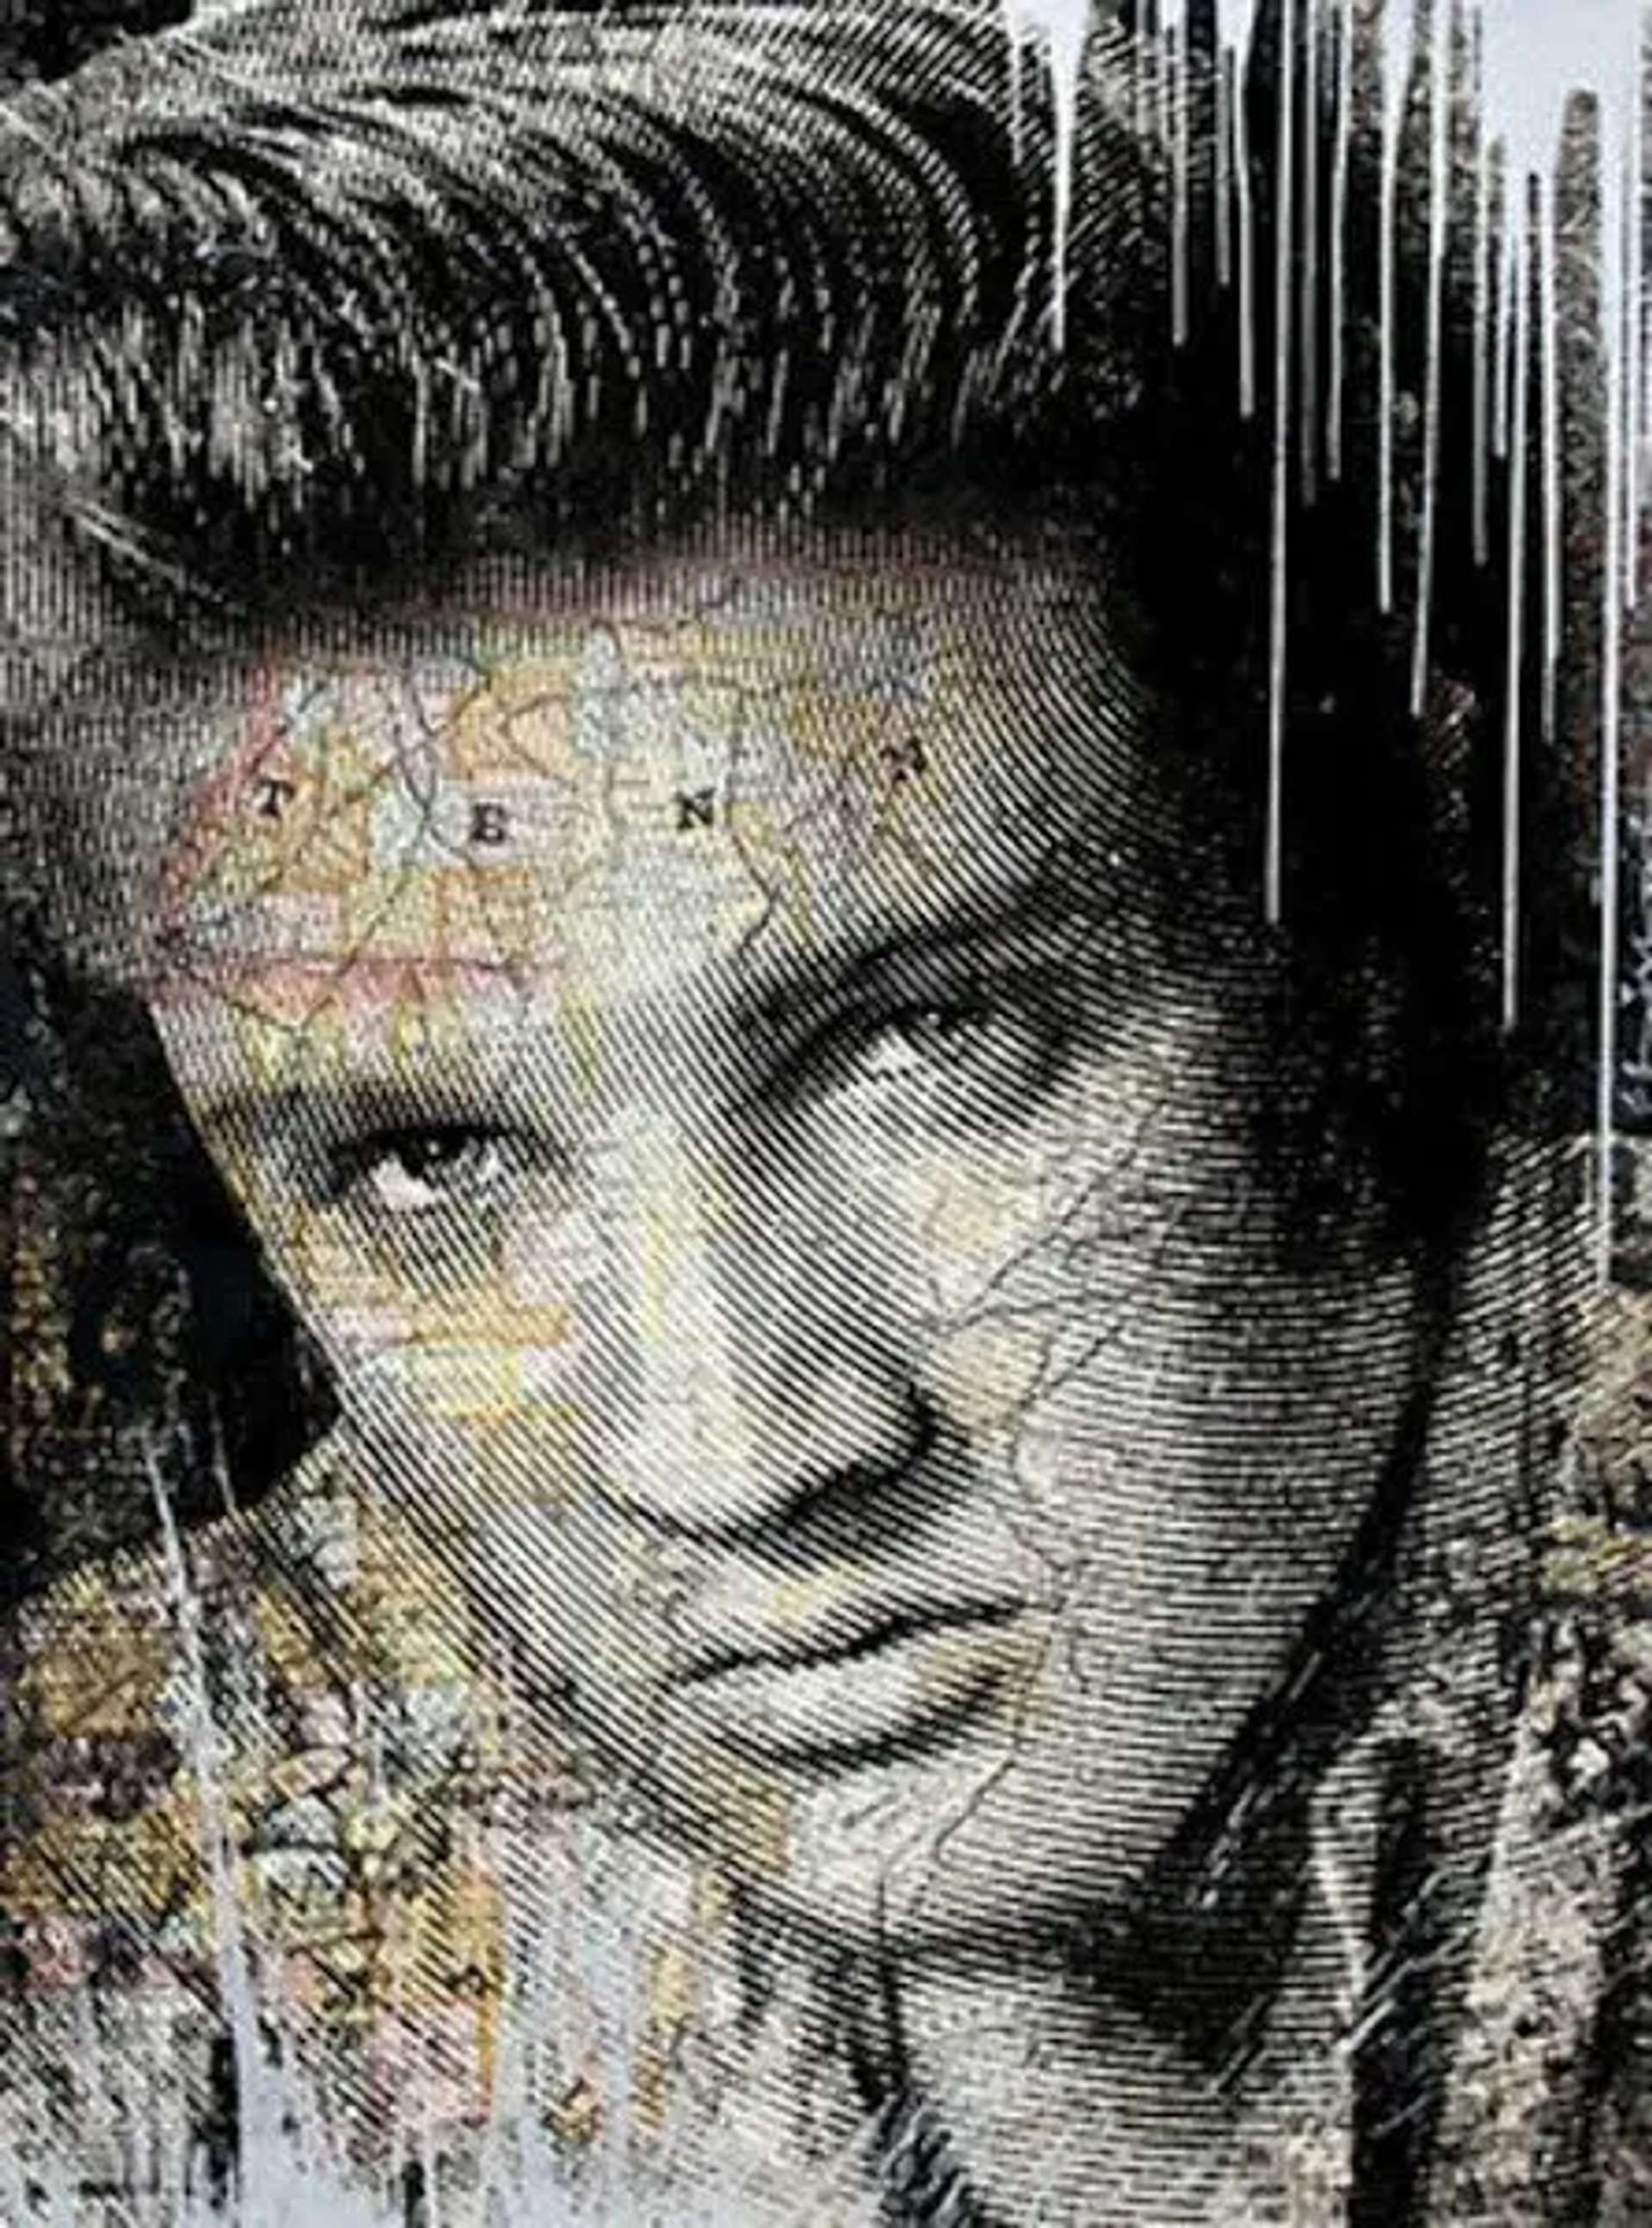 King of Rock and Roll © Mr. Brainwash